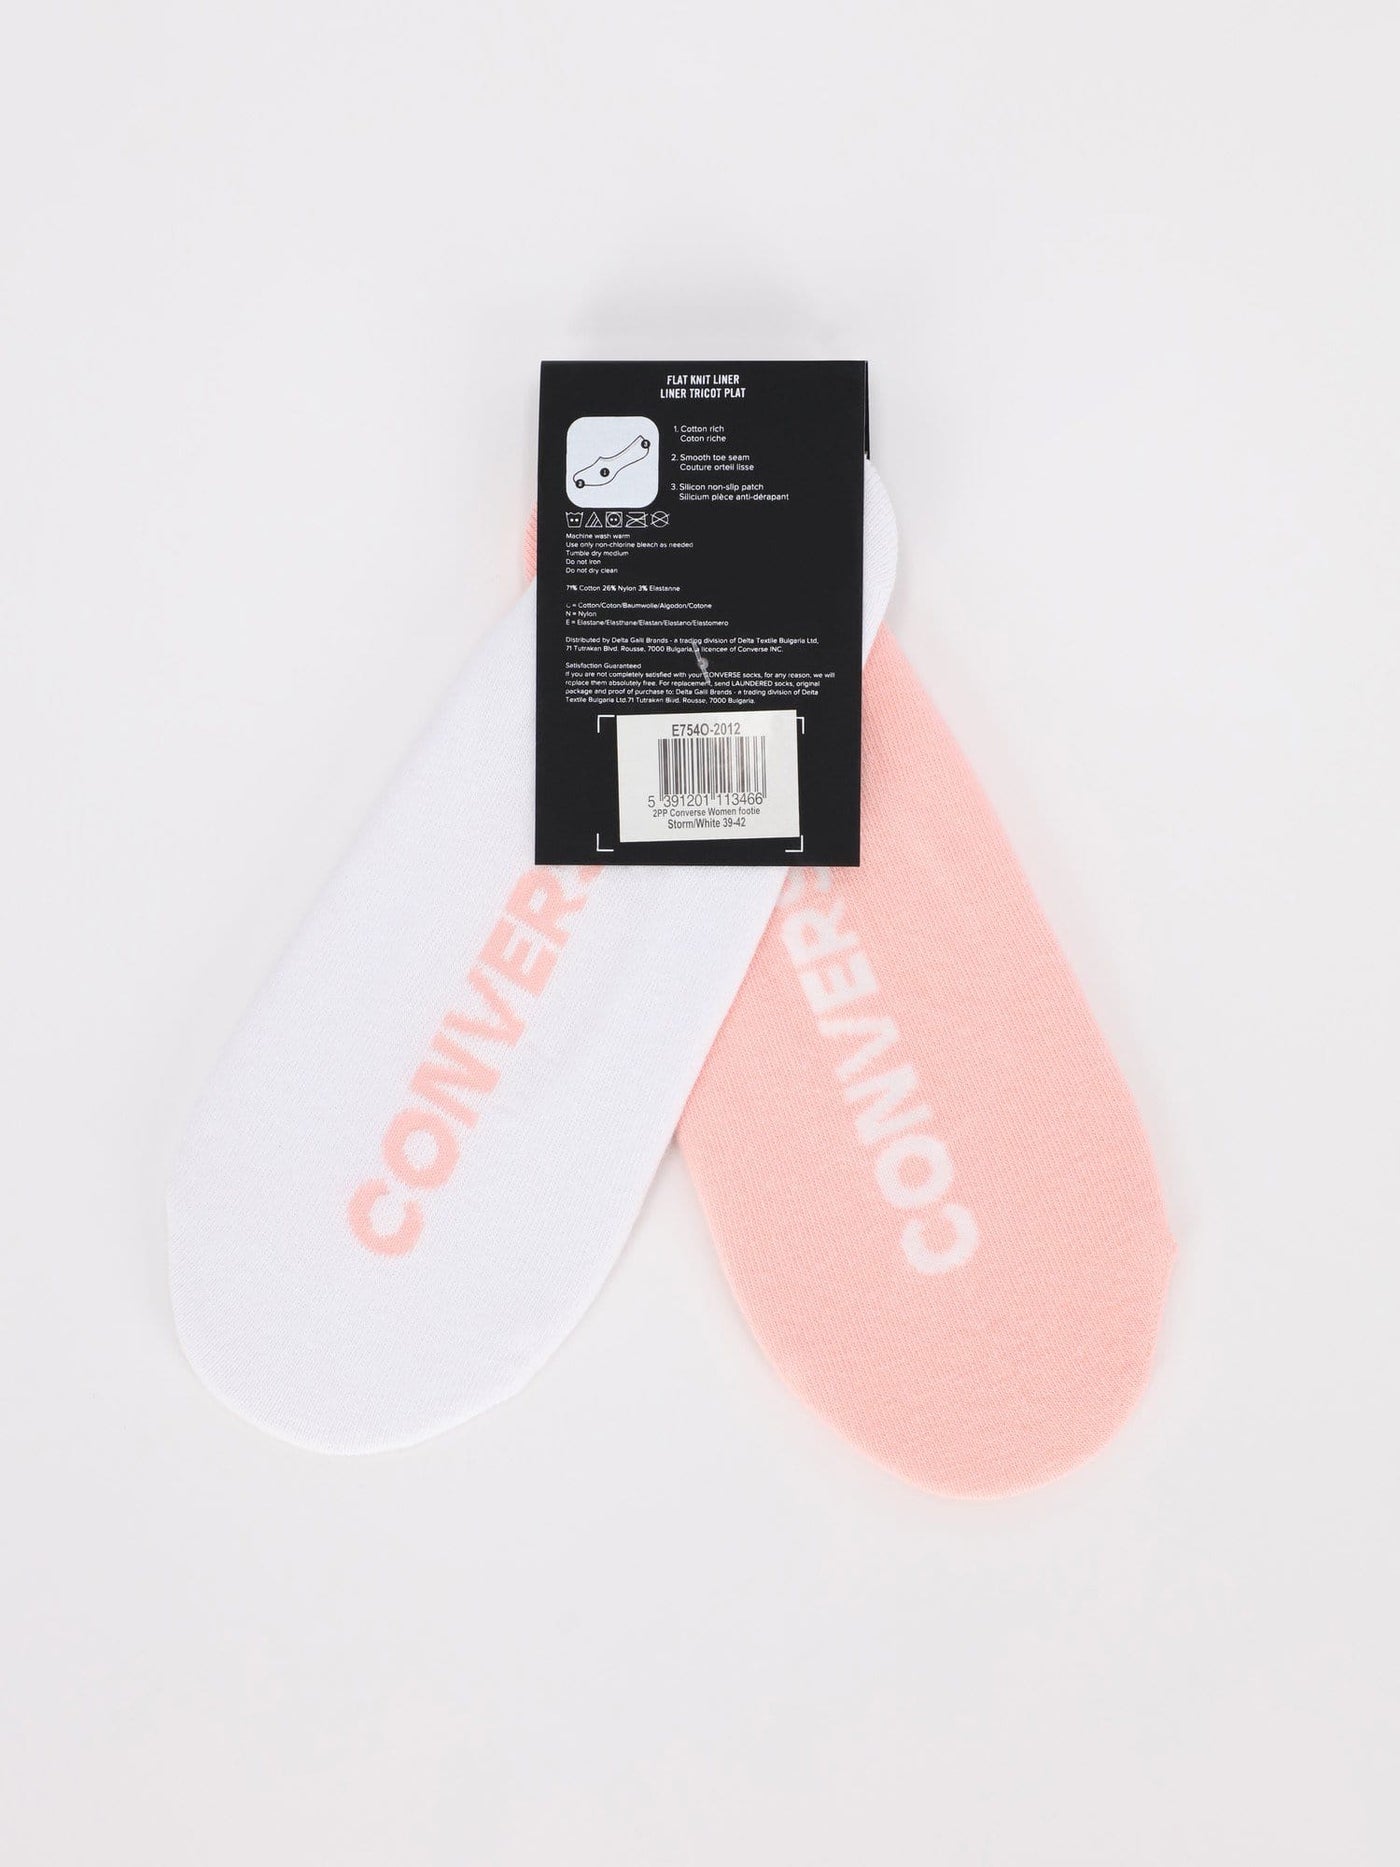 Converse Other Accessories 410 / One Size 2 Pairs of Flat Knit Liner Socks - Storm Pink/White